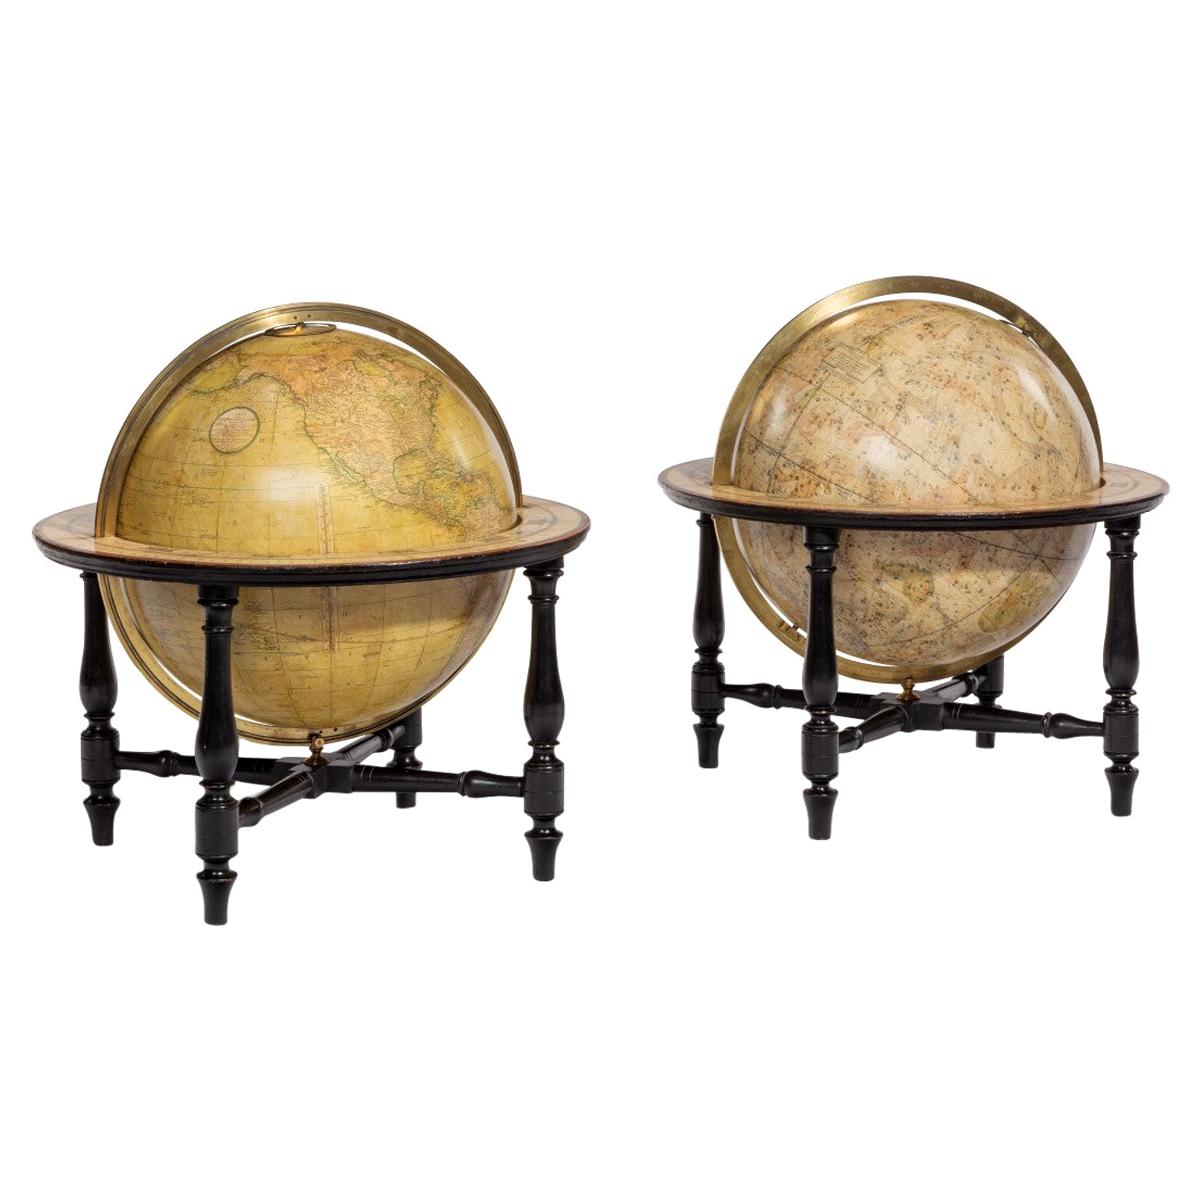 Pair of Cary’s Table Globes